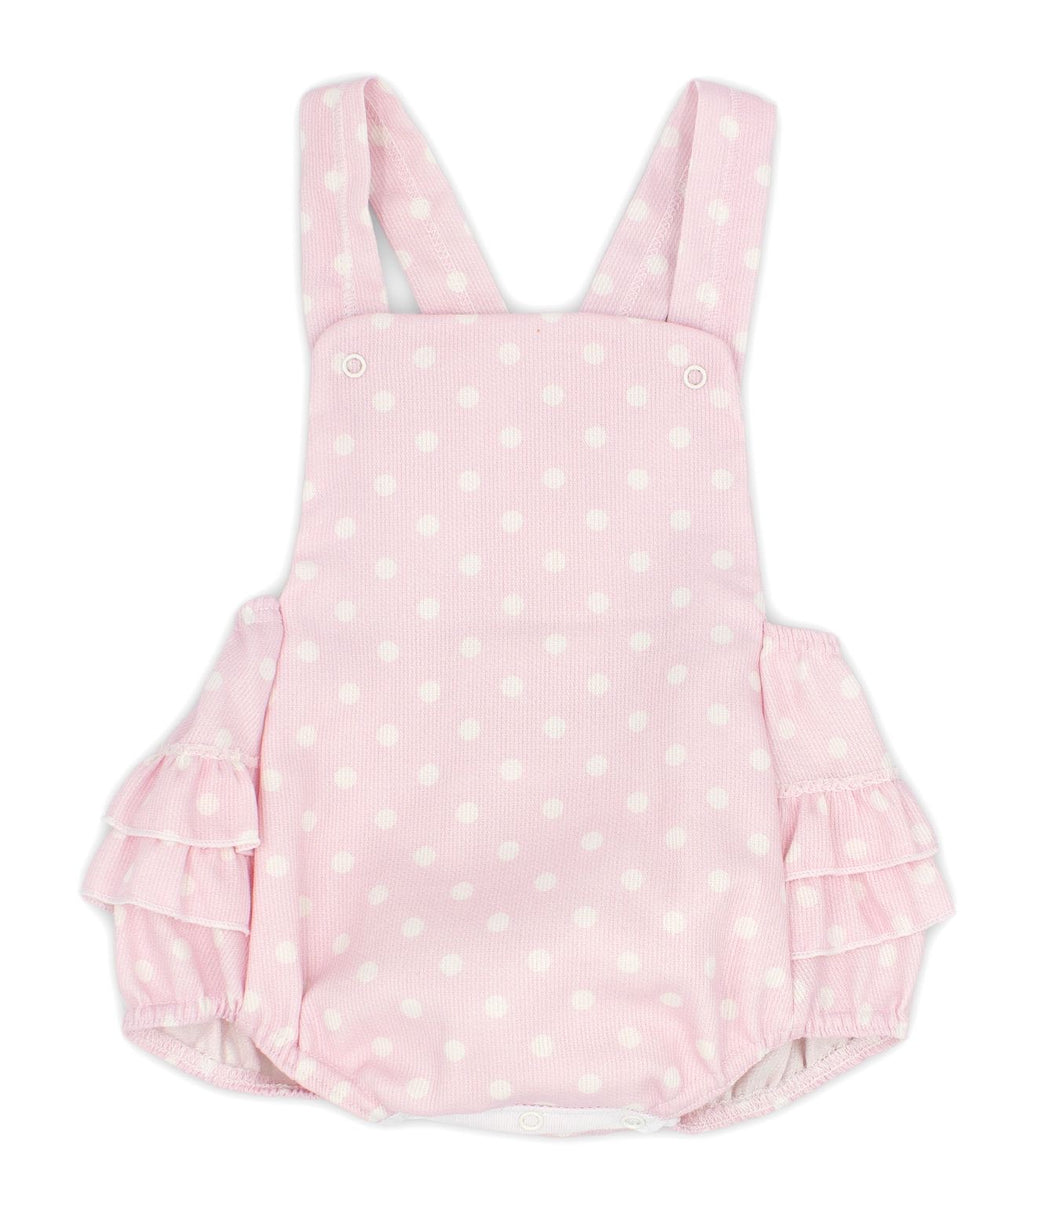 Pink and White Dot Romper